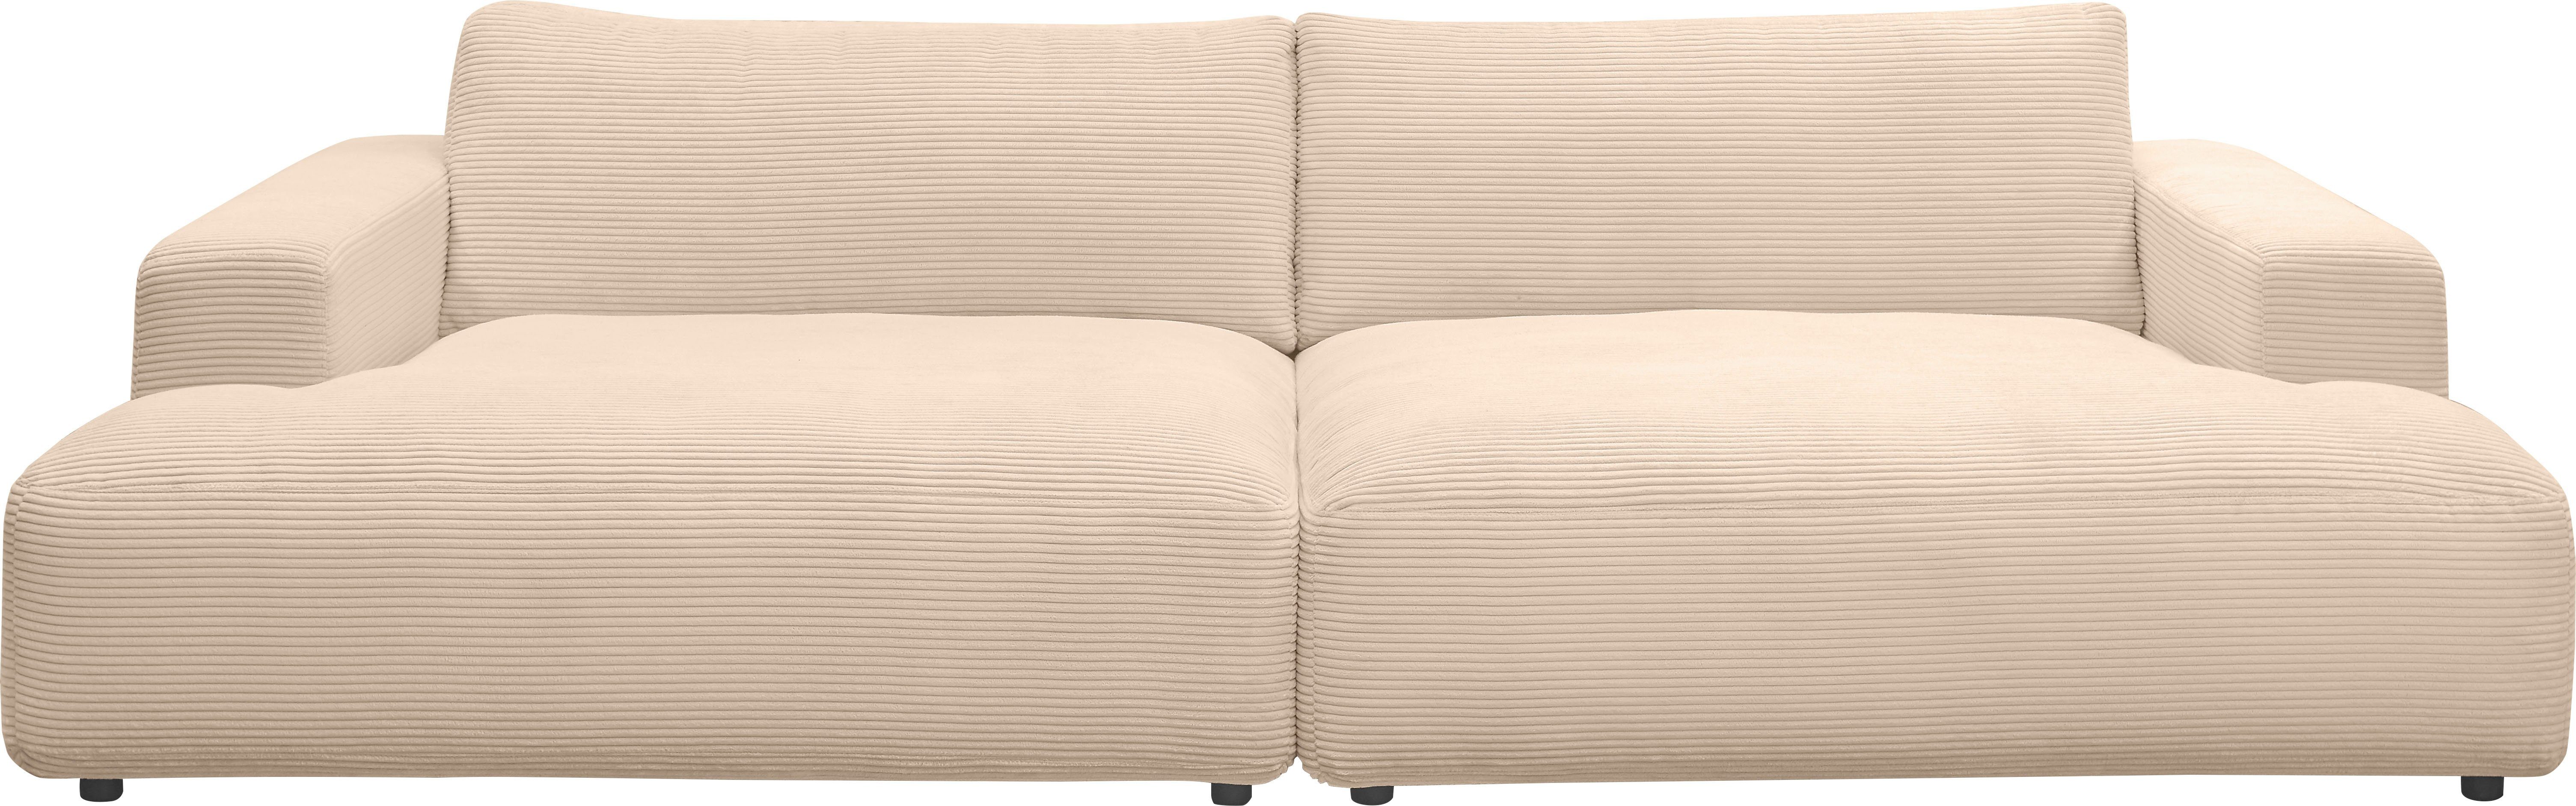 GALLERY M branded by 292 nature Musterring Breite Loungesofa cm Lucia, Cord-Bezug